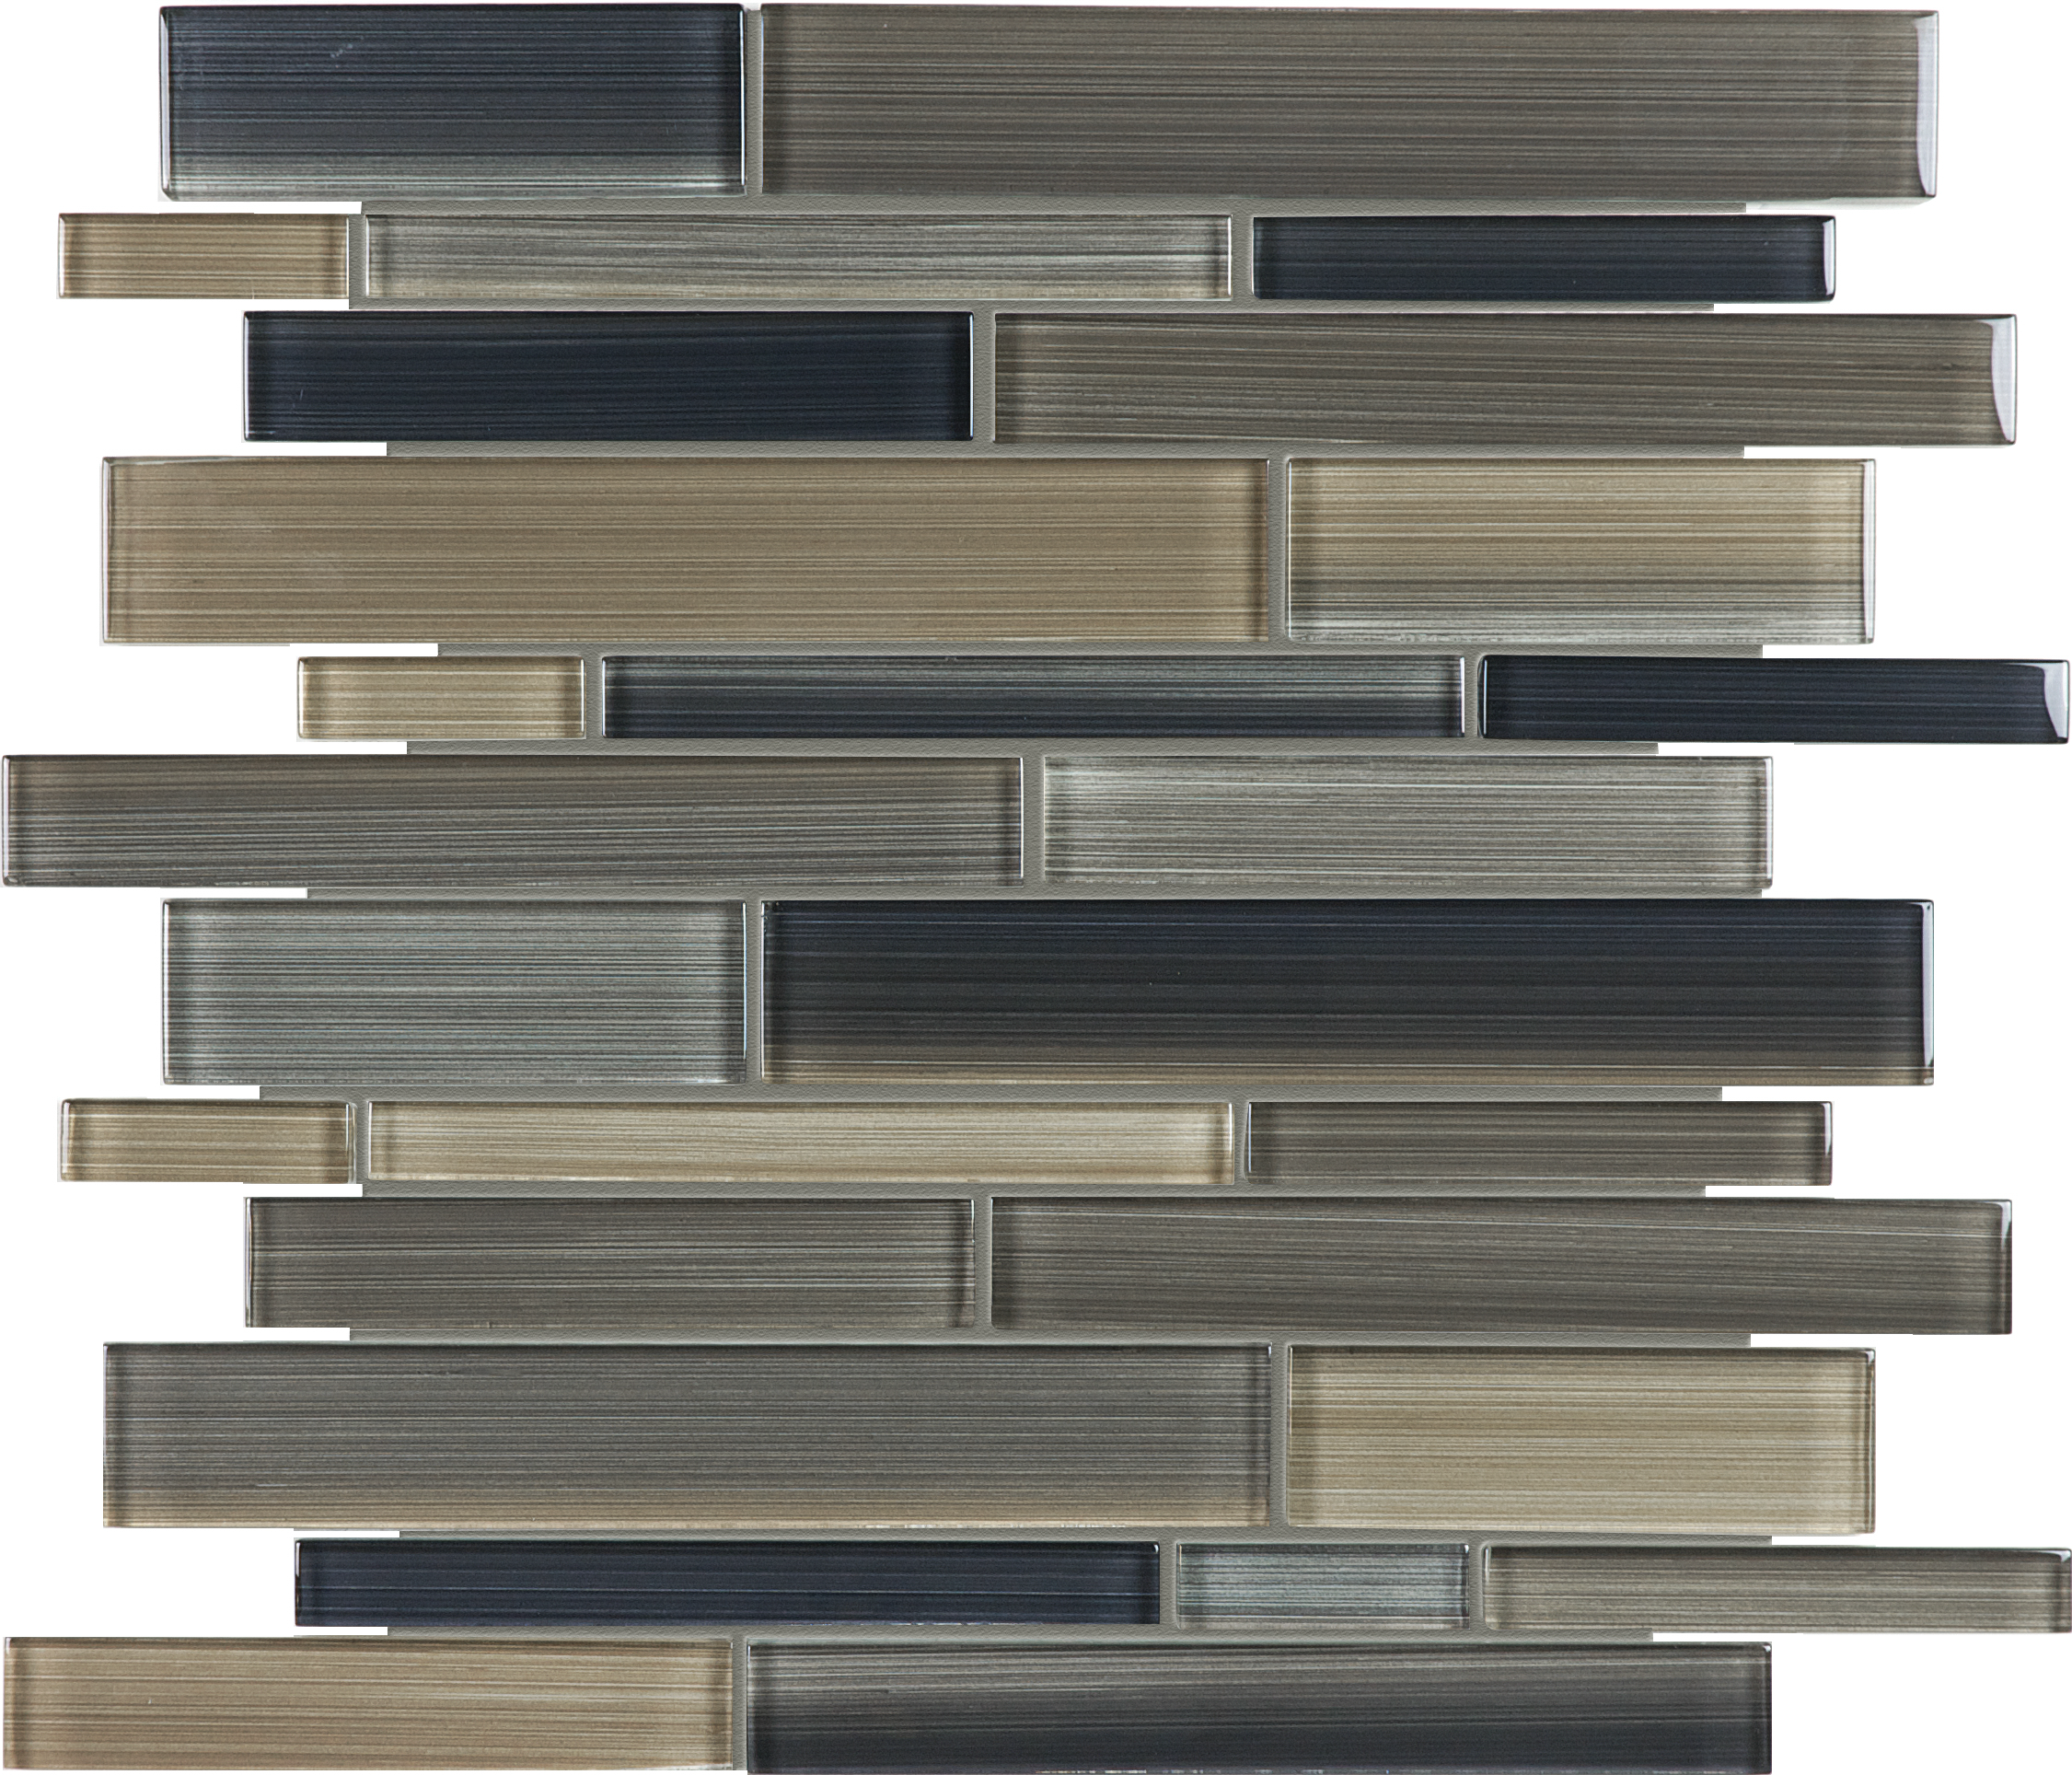 rock random strip pattern fused glass mosaic from fusion anatolia collection distributed by surface group international glossy finish rounded edge mesh shape